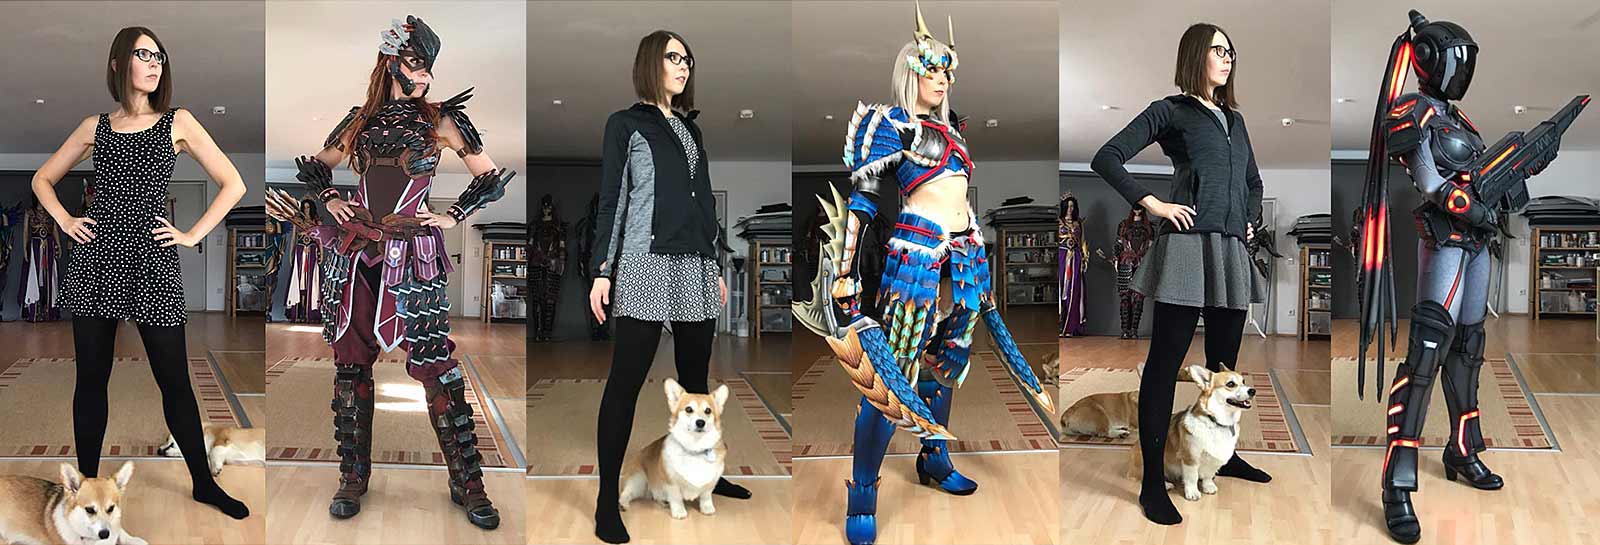 Basics of making costumes for cosplay